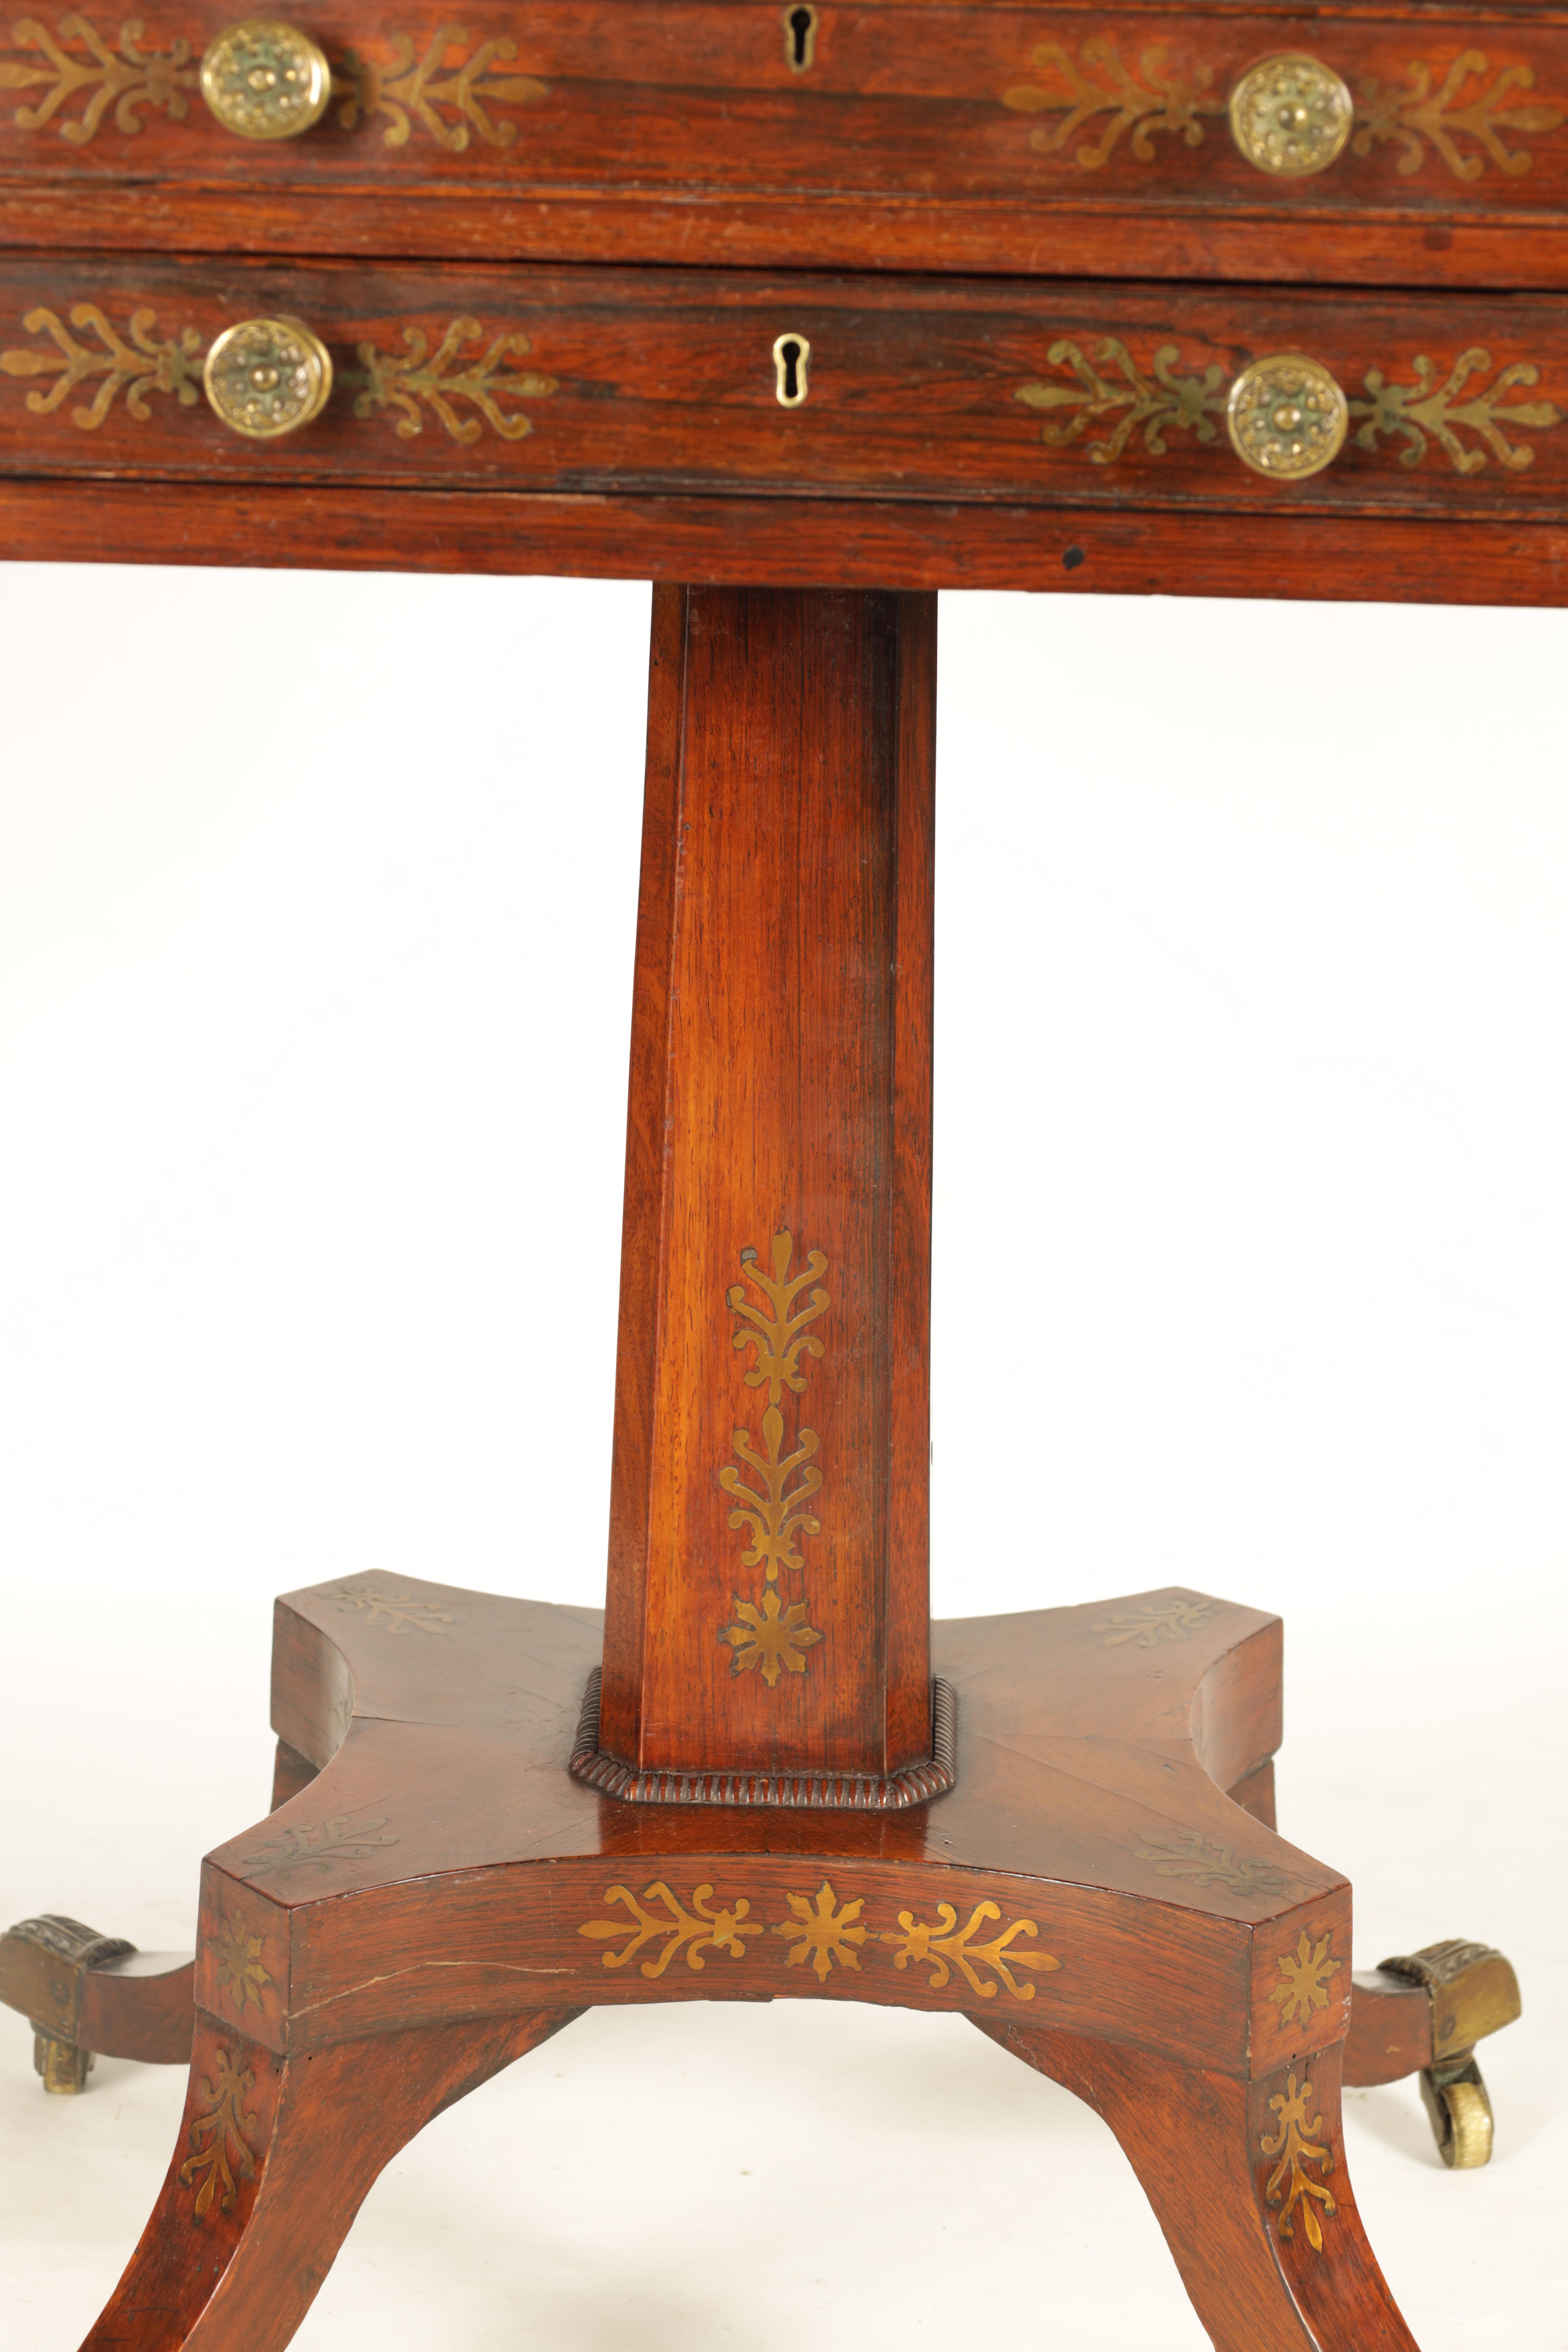 GILLOWS LANCASTER A REGENCY BRASS INLAID FIGURED ROSEWOOD WORK BOX with hinged floral inlaid chess - Image 6 of 16